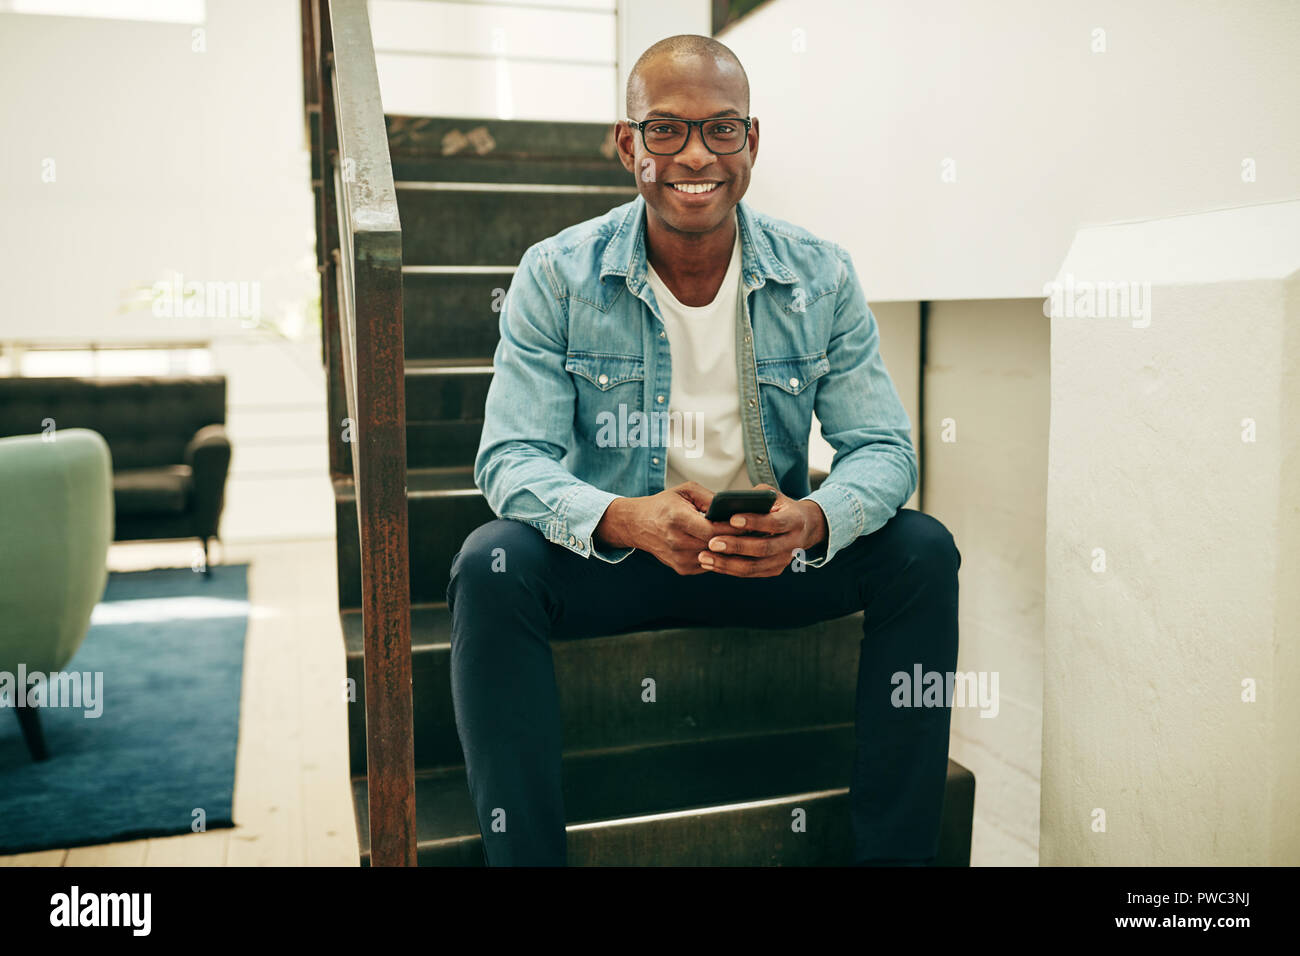 Smiling young African businessman wearing glasses sitting on stairs in an office reading text messages on a cellphone Stock Photo